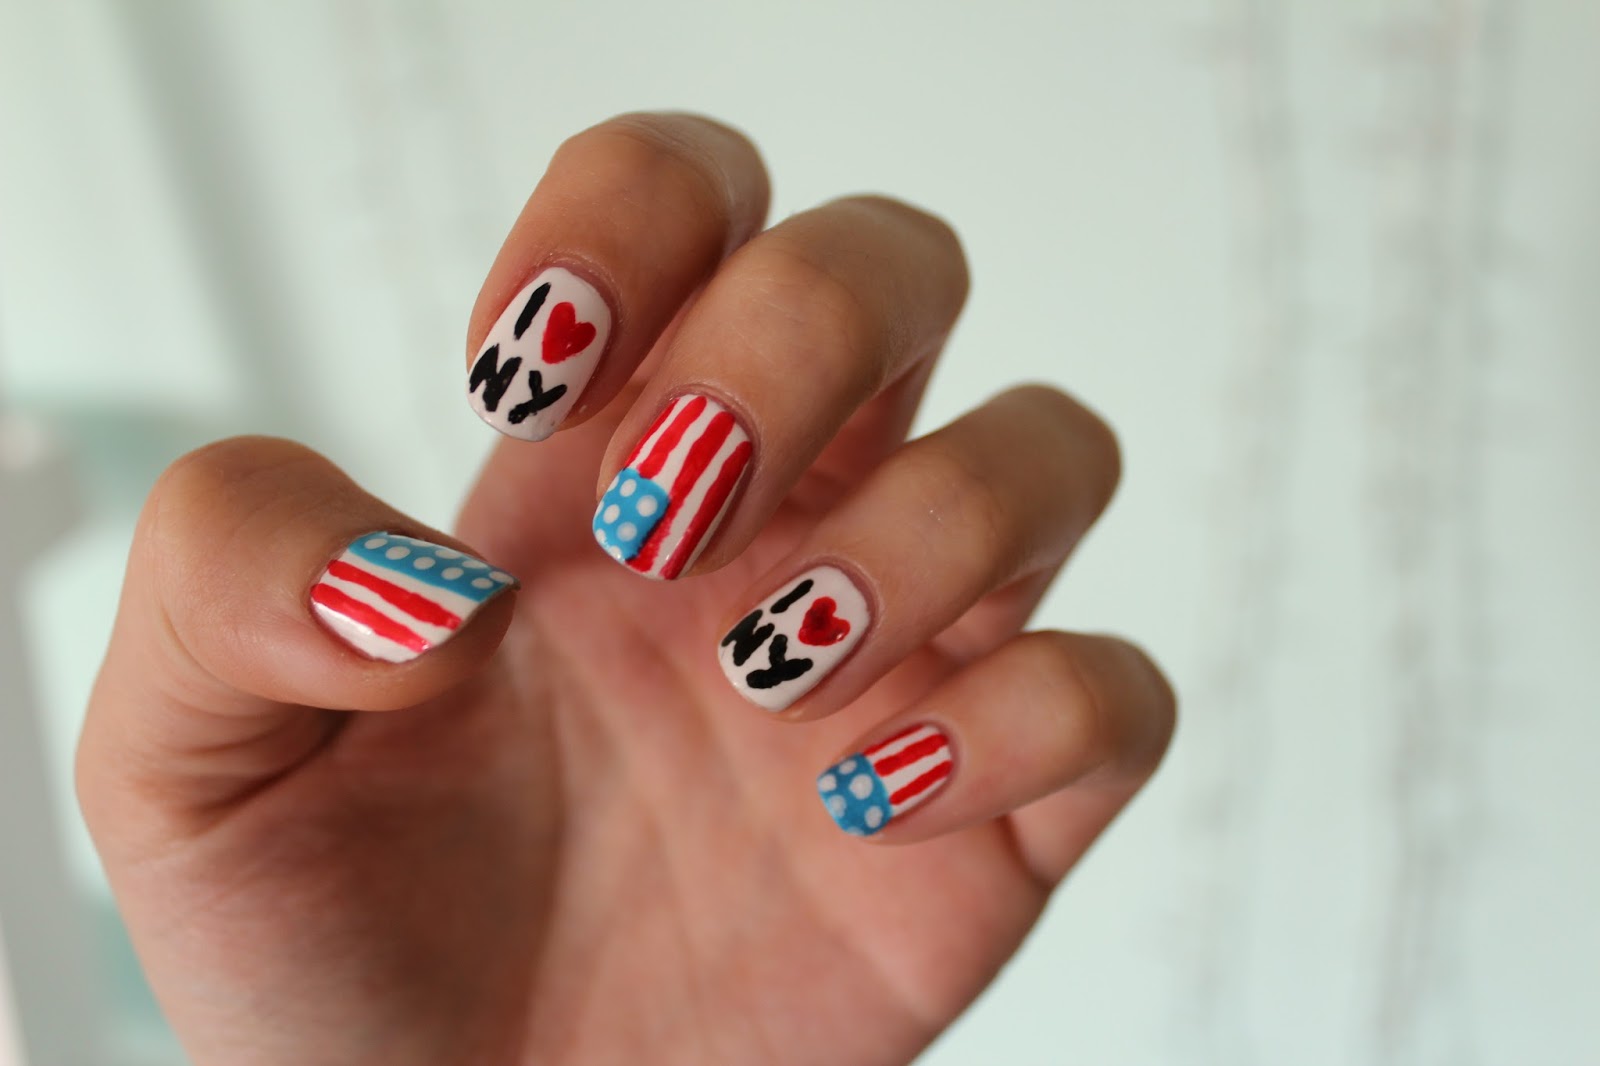 3. "Nail Art Trends: From NY to LA" - wide 3